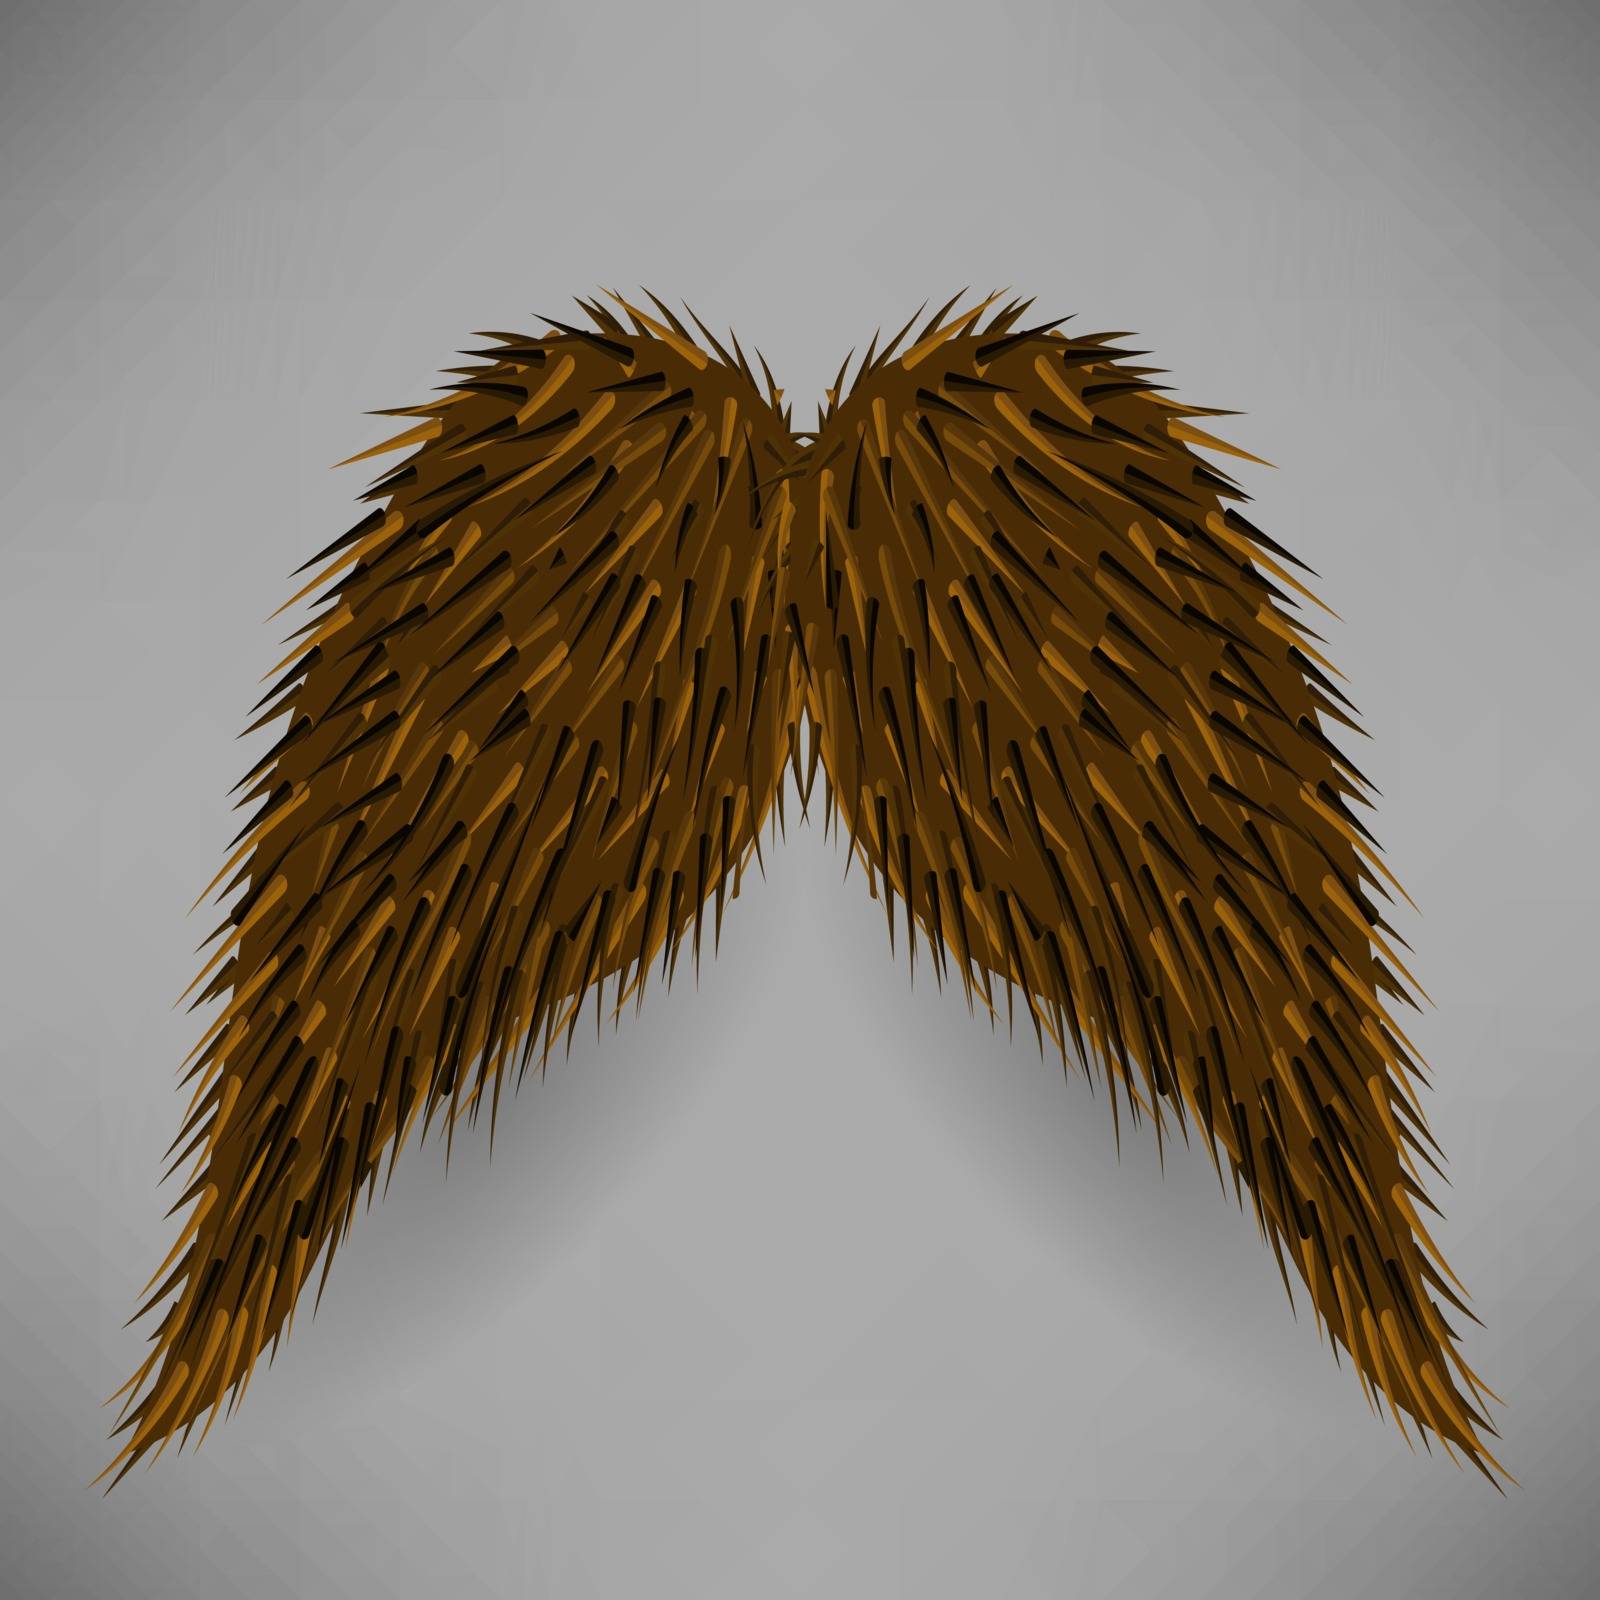 Brown Hairy Mustache Isolated on Grey Background.